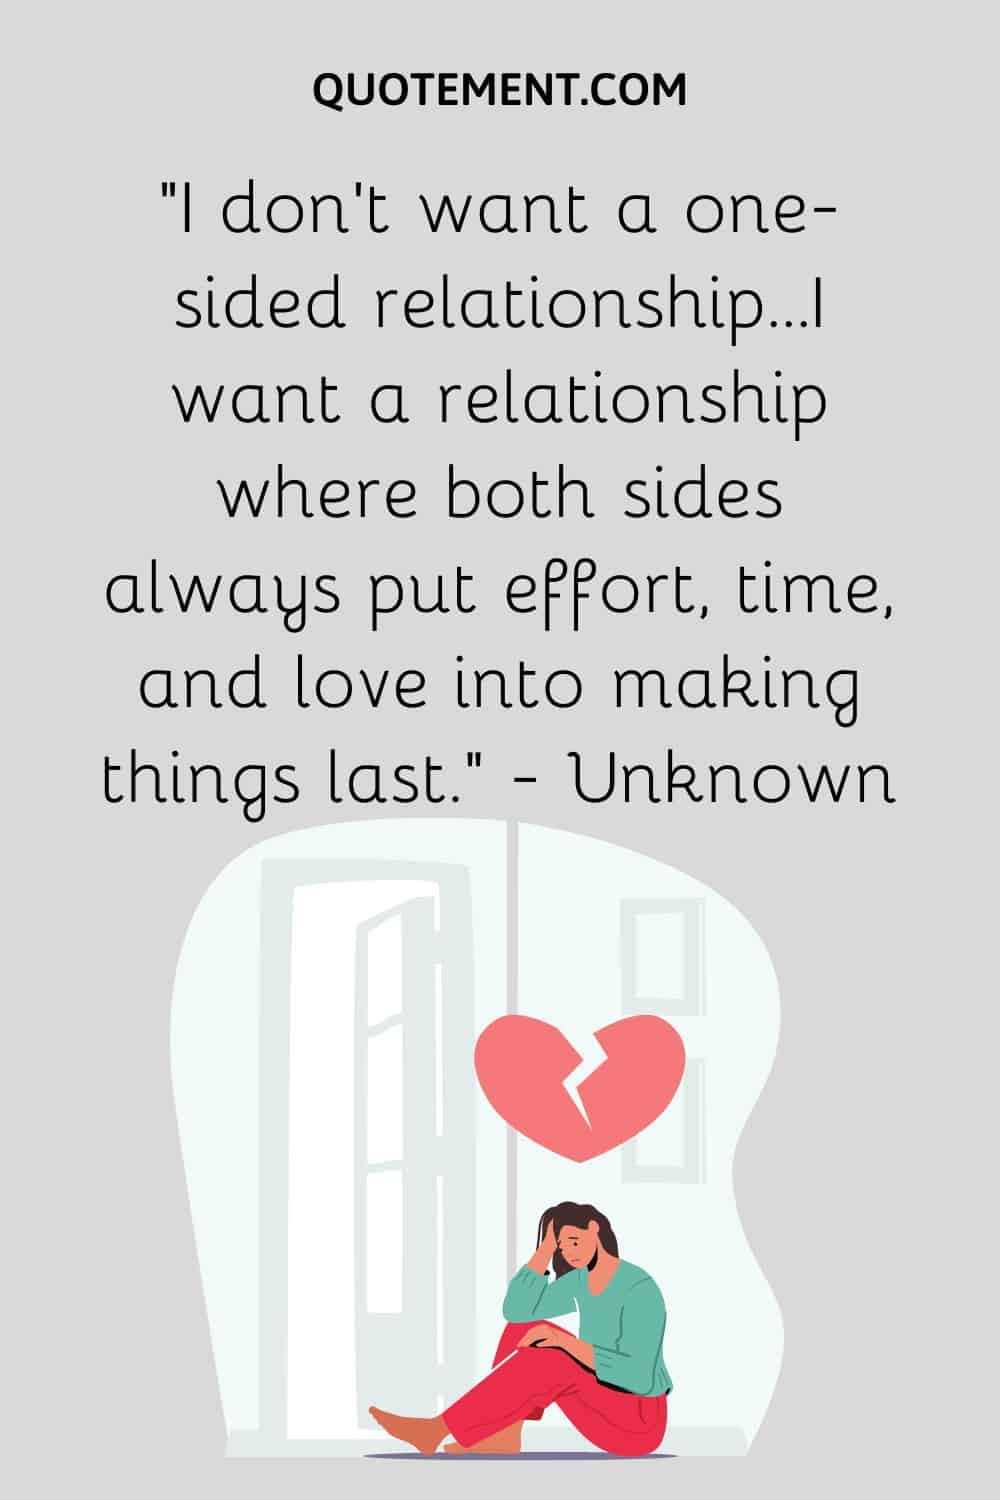 130 One-Sided Effort Relationship Quotes To Comfort You